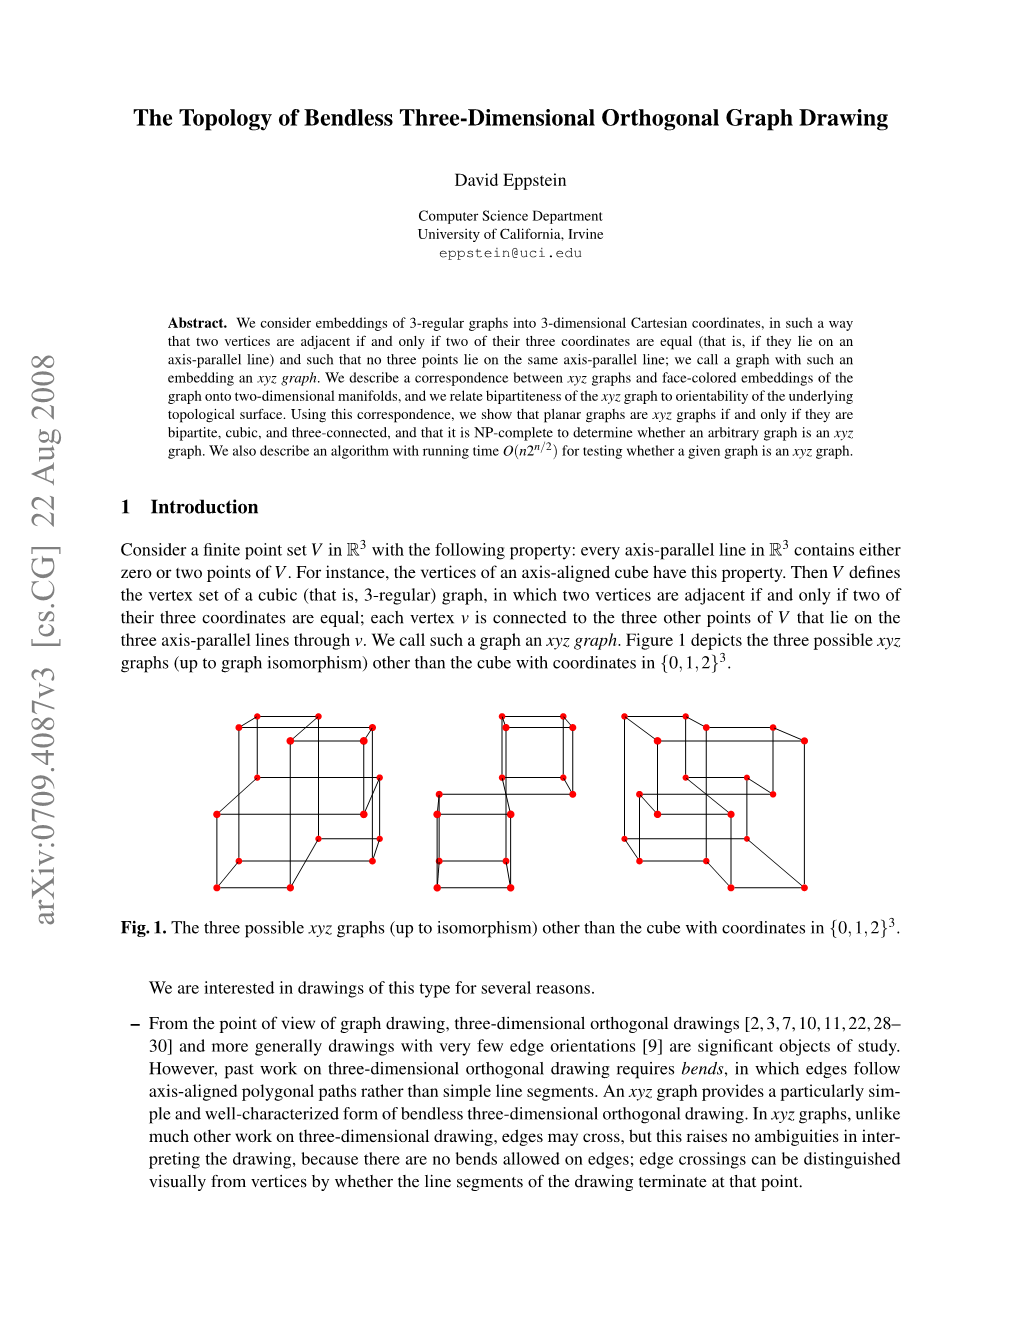 The Topology of Bendless Three-Dimensional Orthogonal Graph Drawing